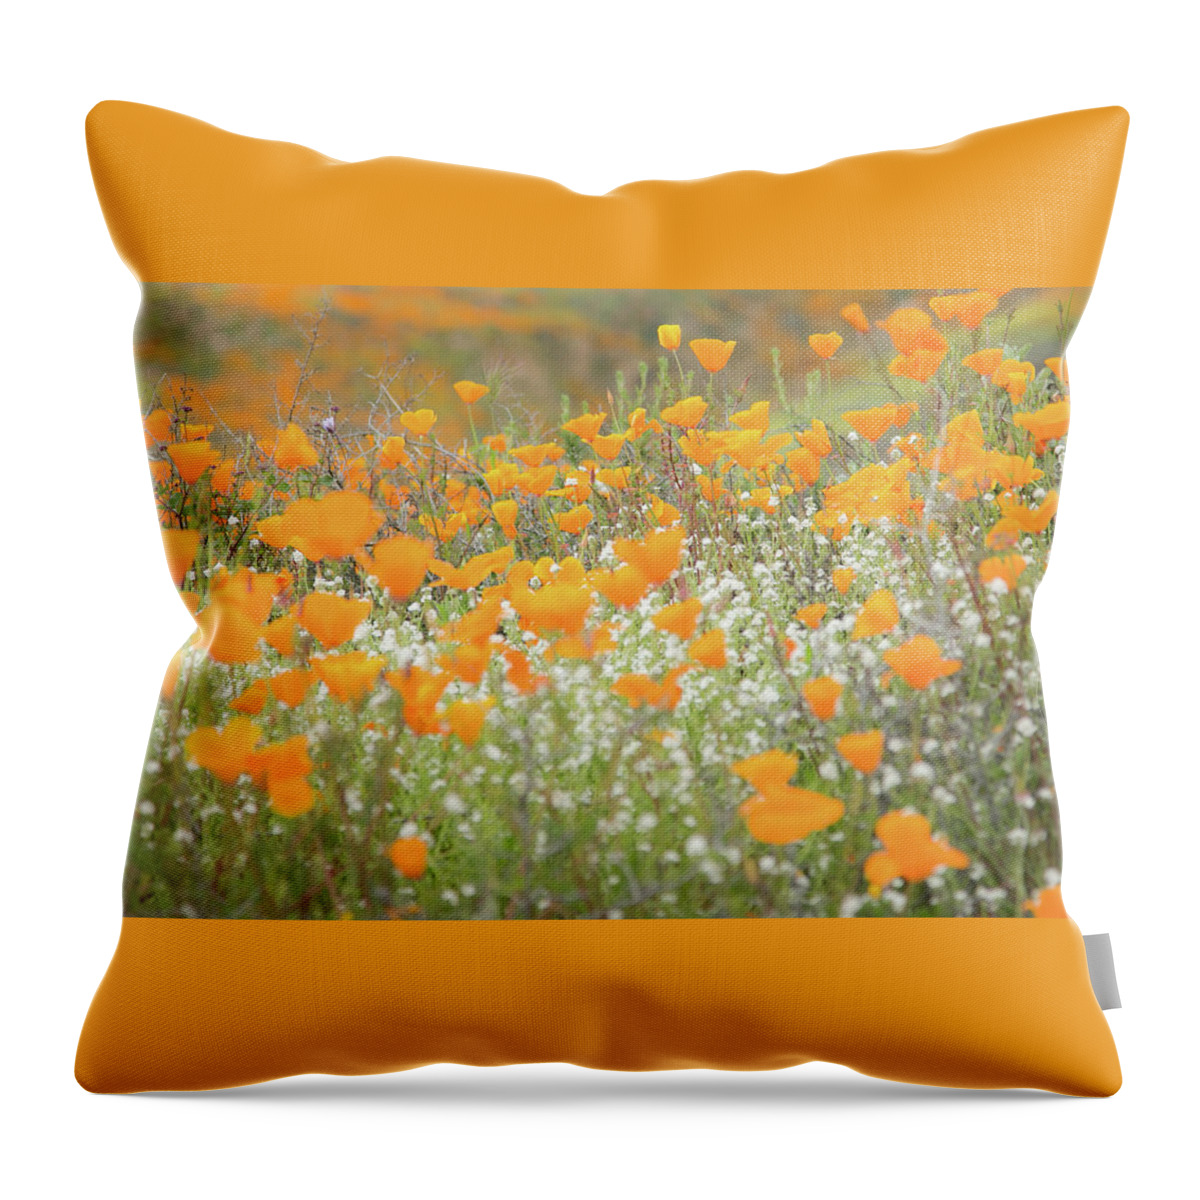 Flowers Throw Pillow featuring the photograph Flora by Ryan Weddle